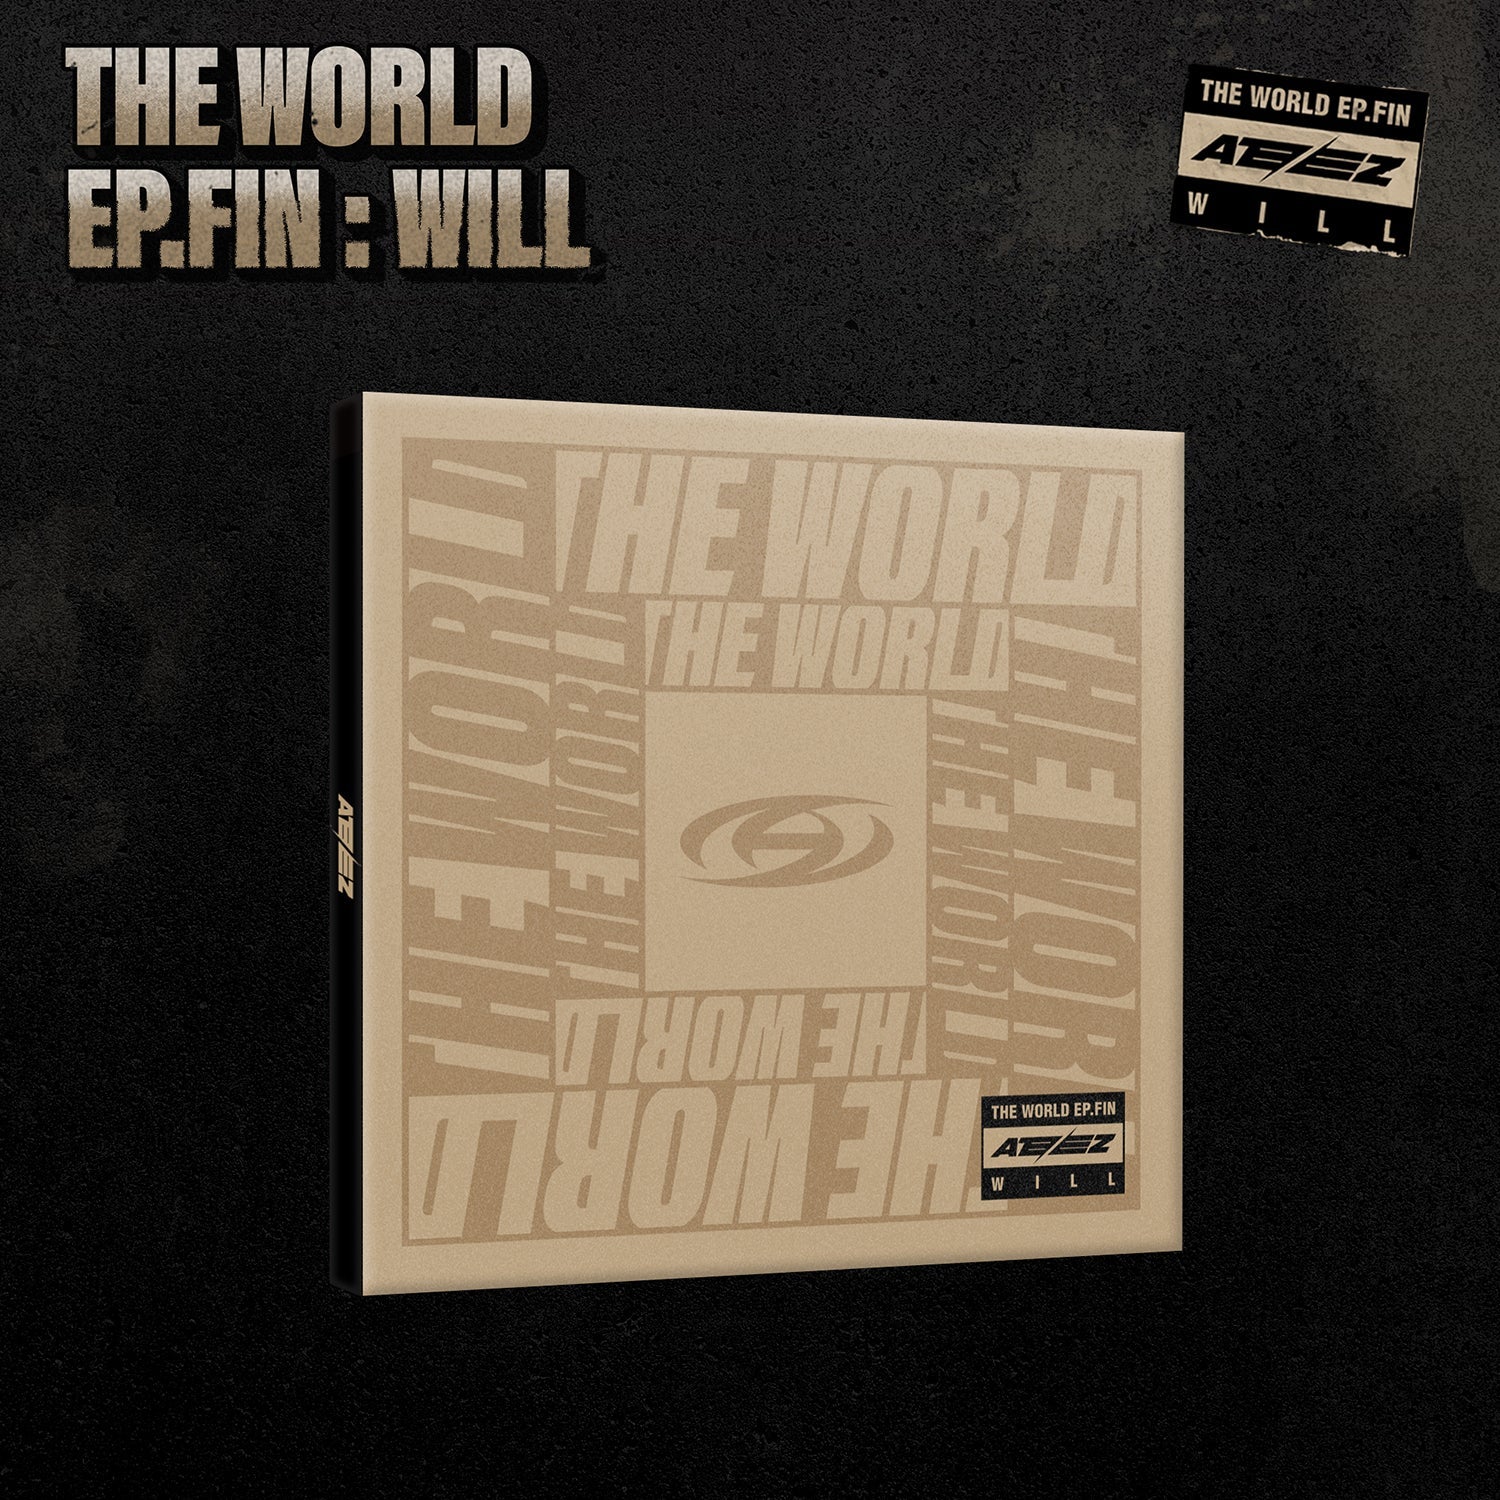 ATEEZ ALBUM 'THE WORLD EP.FIN : WILL' (DIGIPACK) COVER